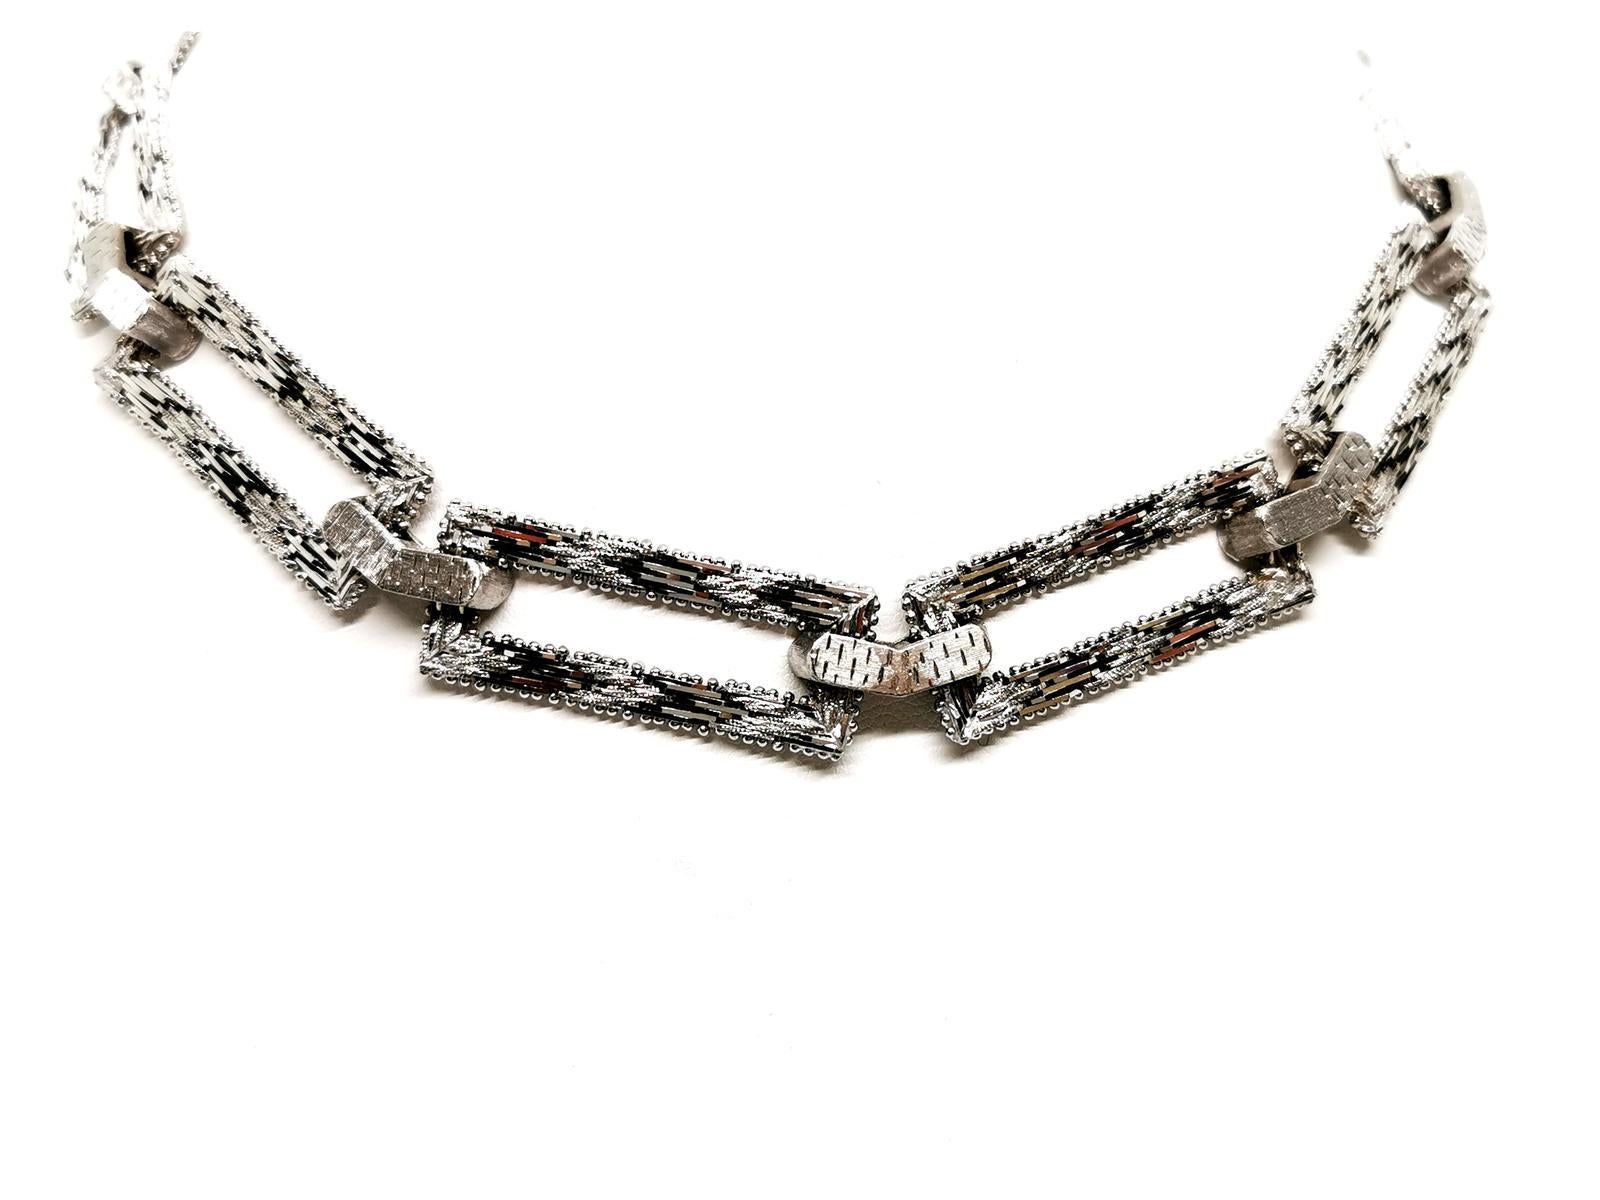 Necklace art deco. white gold 750 mils (18K). composed of 10 rectangular flexible links. worked in matt or shiny. length: 40 cm. width: 1.4 cm. rectangular patterns dimensions: 3.4 cm x 1.4 cm. with eight safety clasp. total weight: 90.29 g. punch